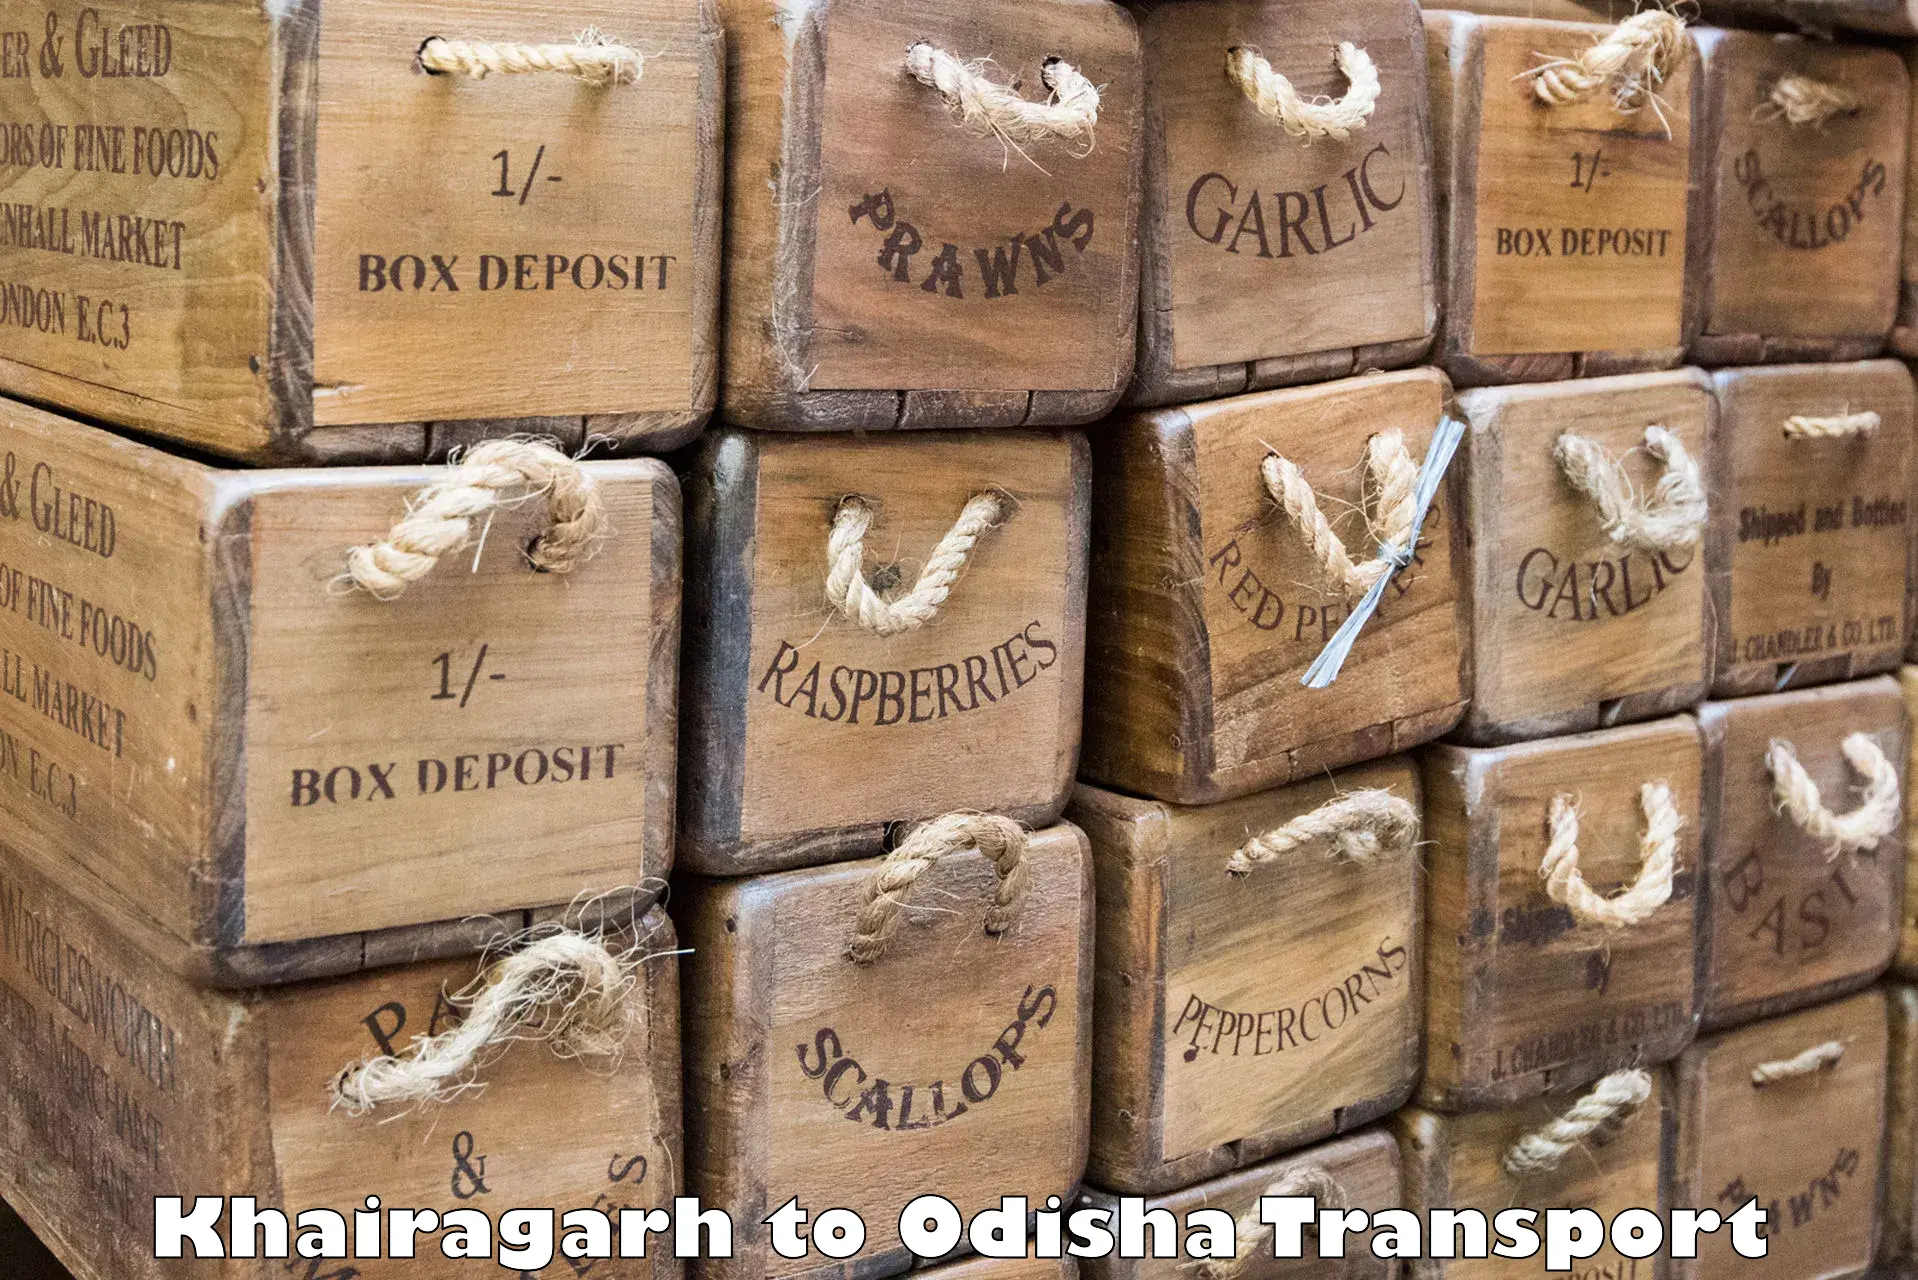 Container transportation services Khairagarh to Bhuban